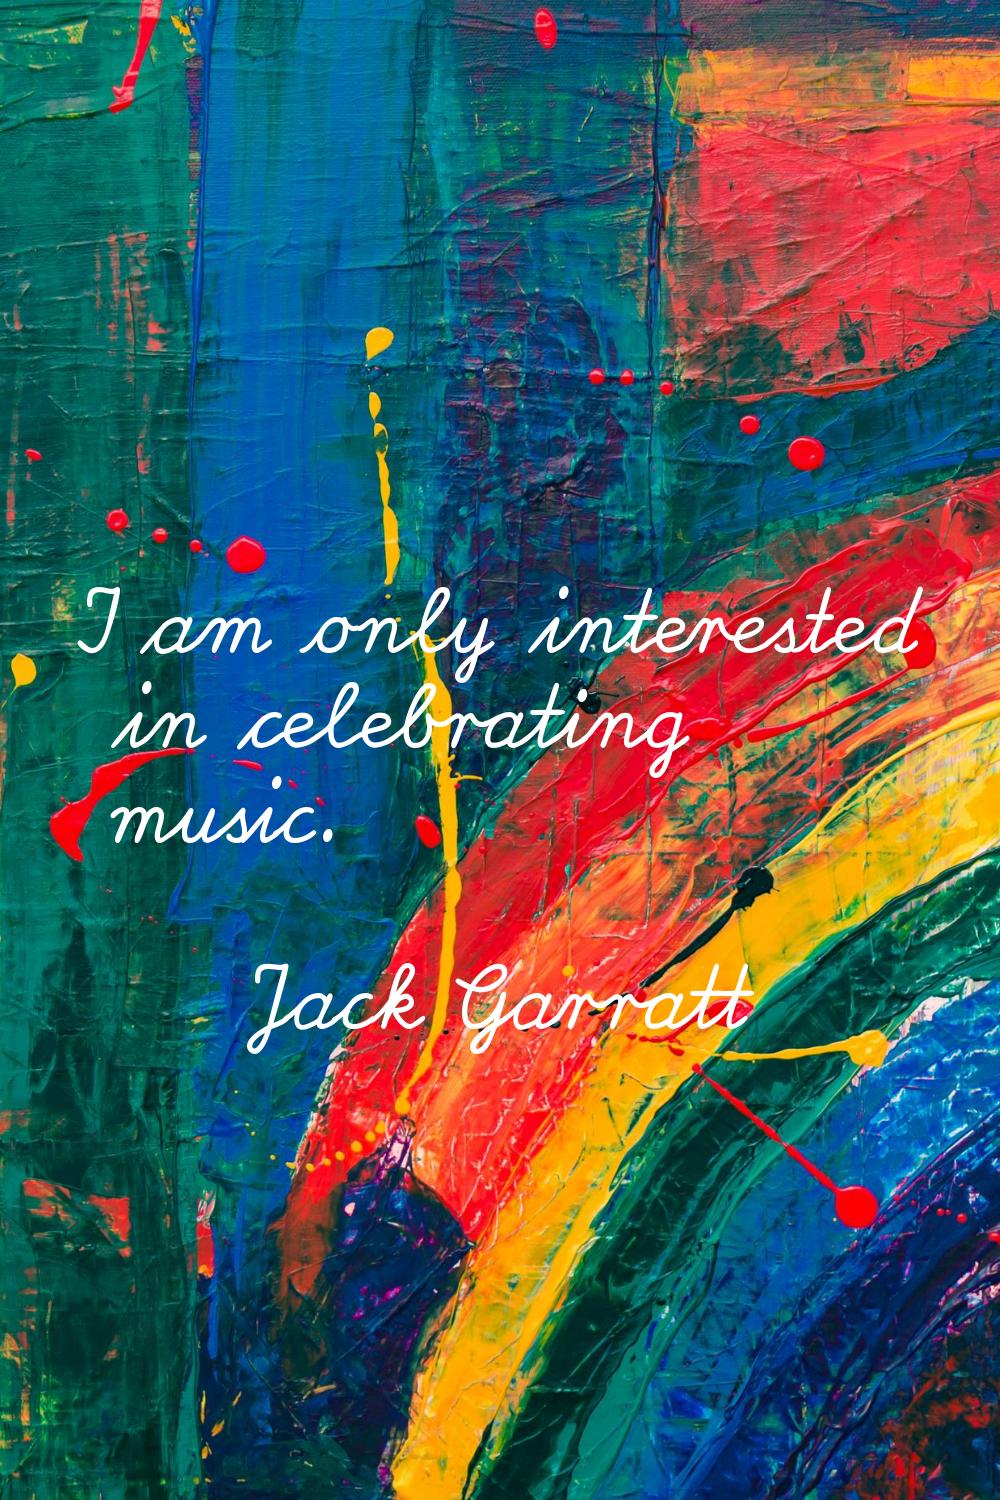 I am only interested in celebrating music.